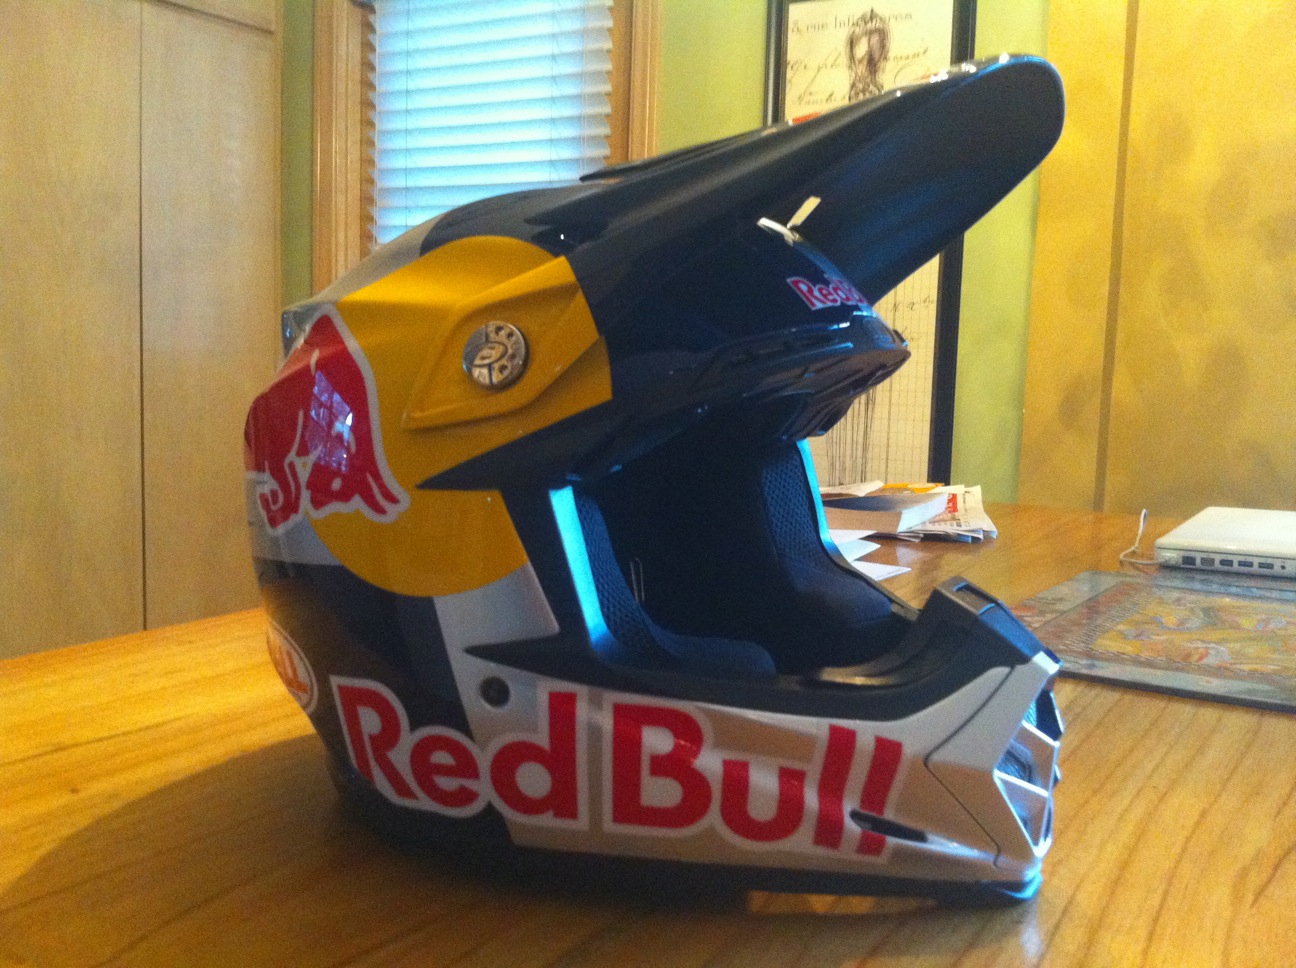 Grant Have a bath canvas 2011 Bell Helmet M9 Red Bull painted « LAnce Coury